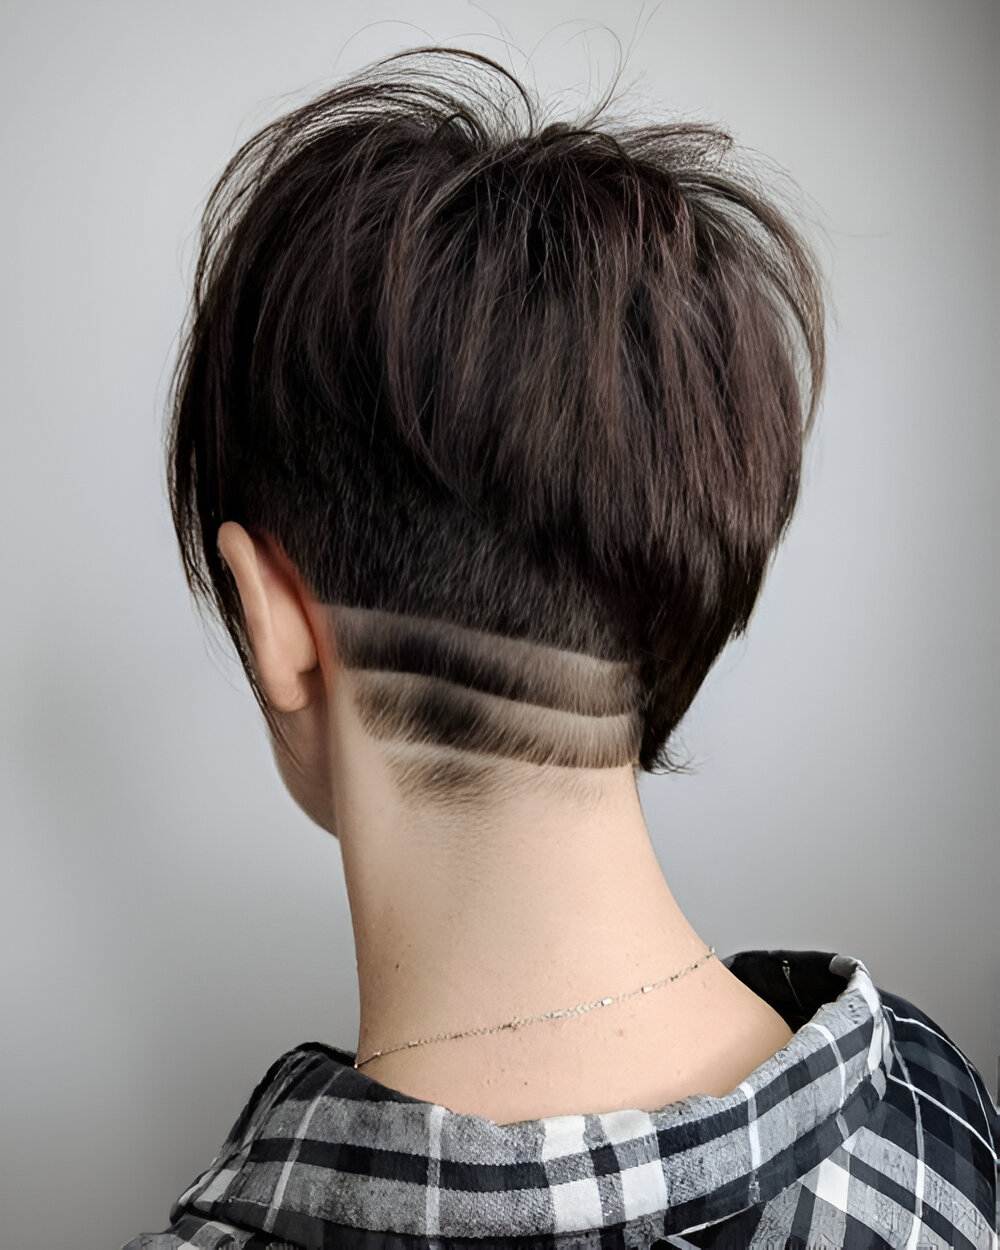 25 Trendiest Short Asymmetrical Haircuts For A Cool Chic Look - 211